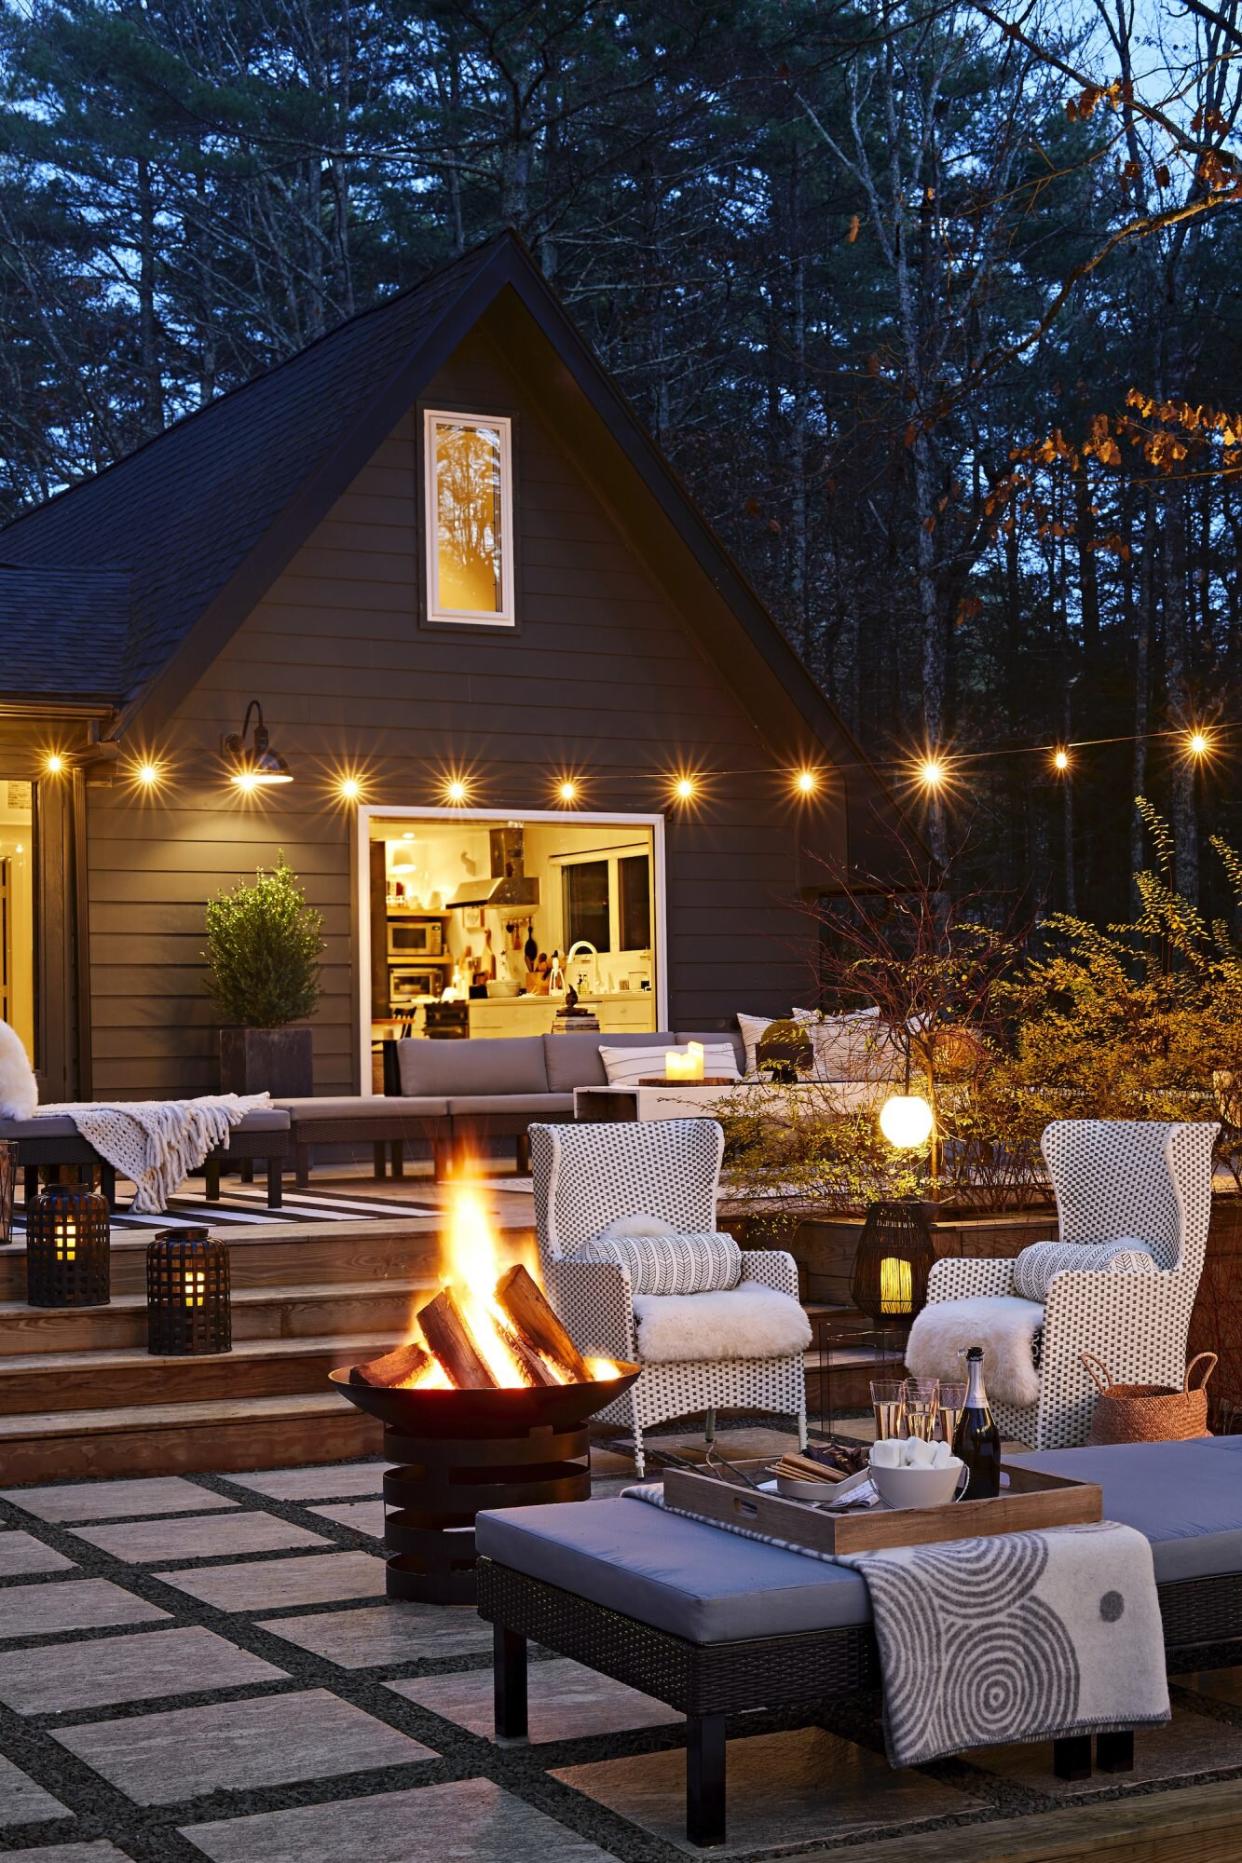 Space of the Month Feb 2021, Deck Decor with Lights and Firepit